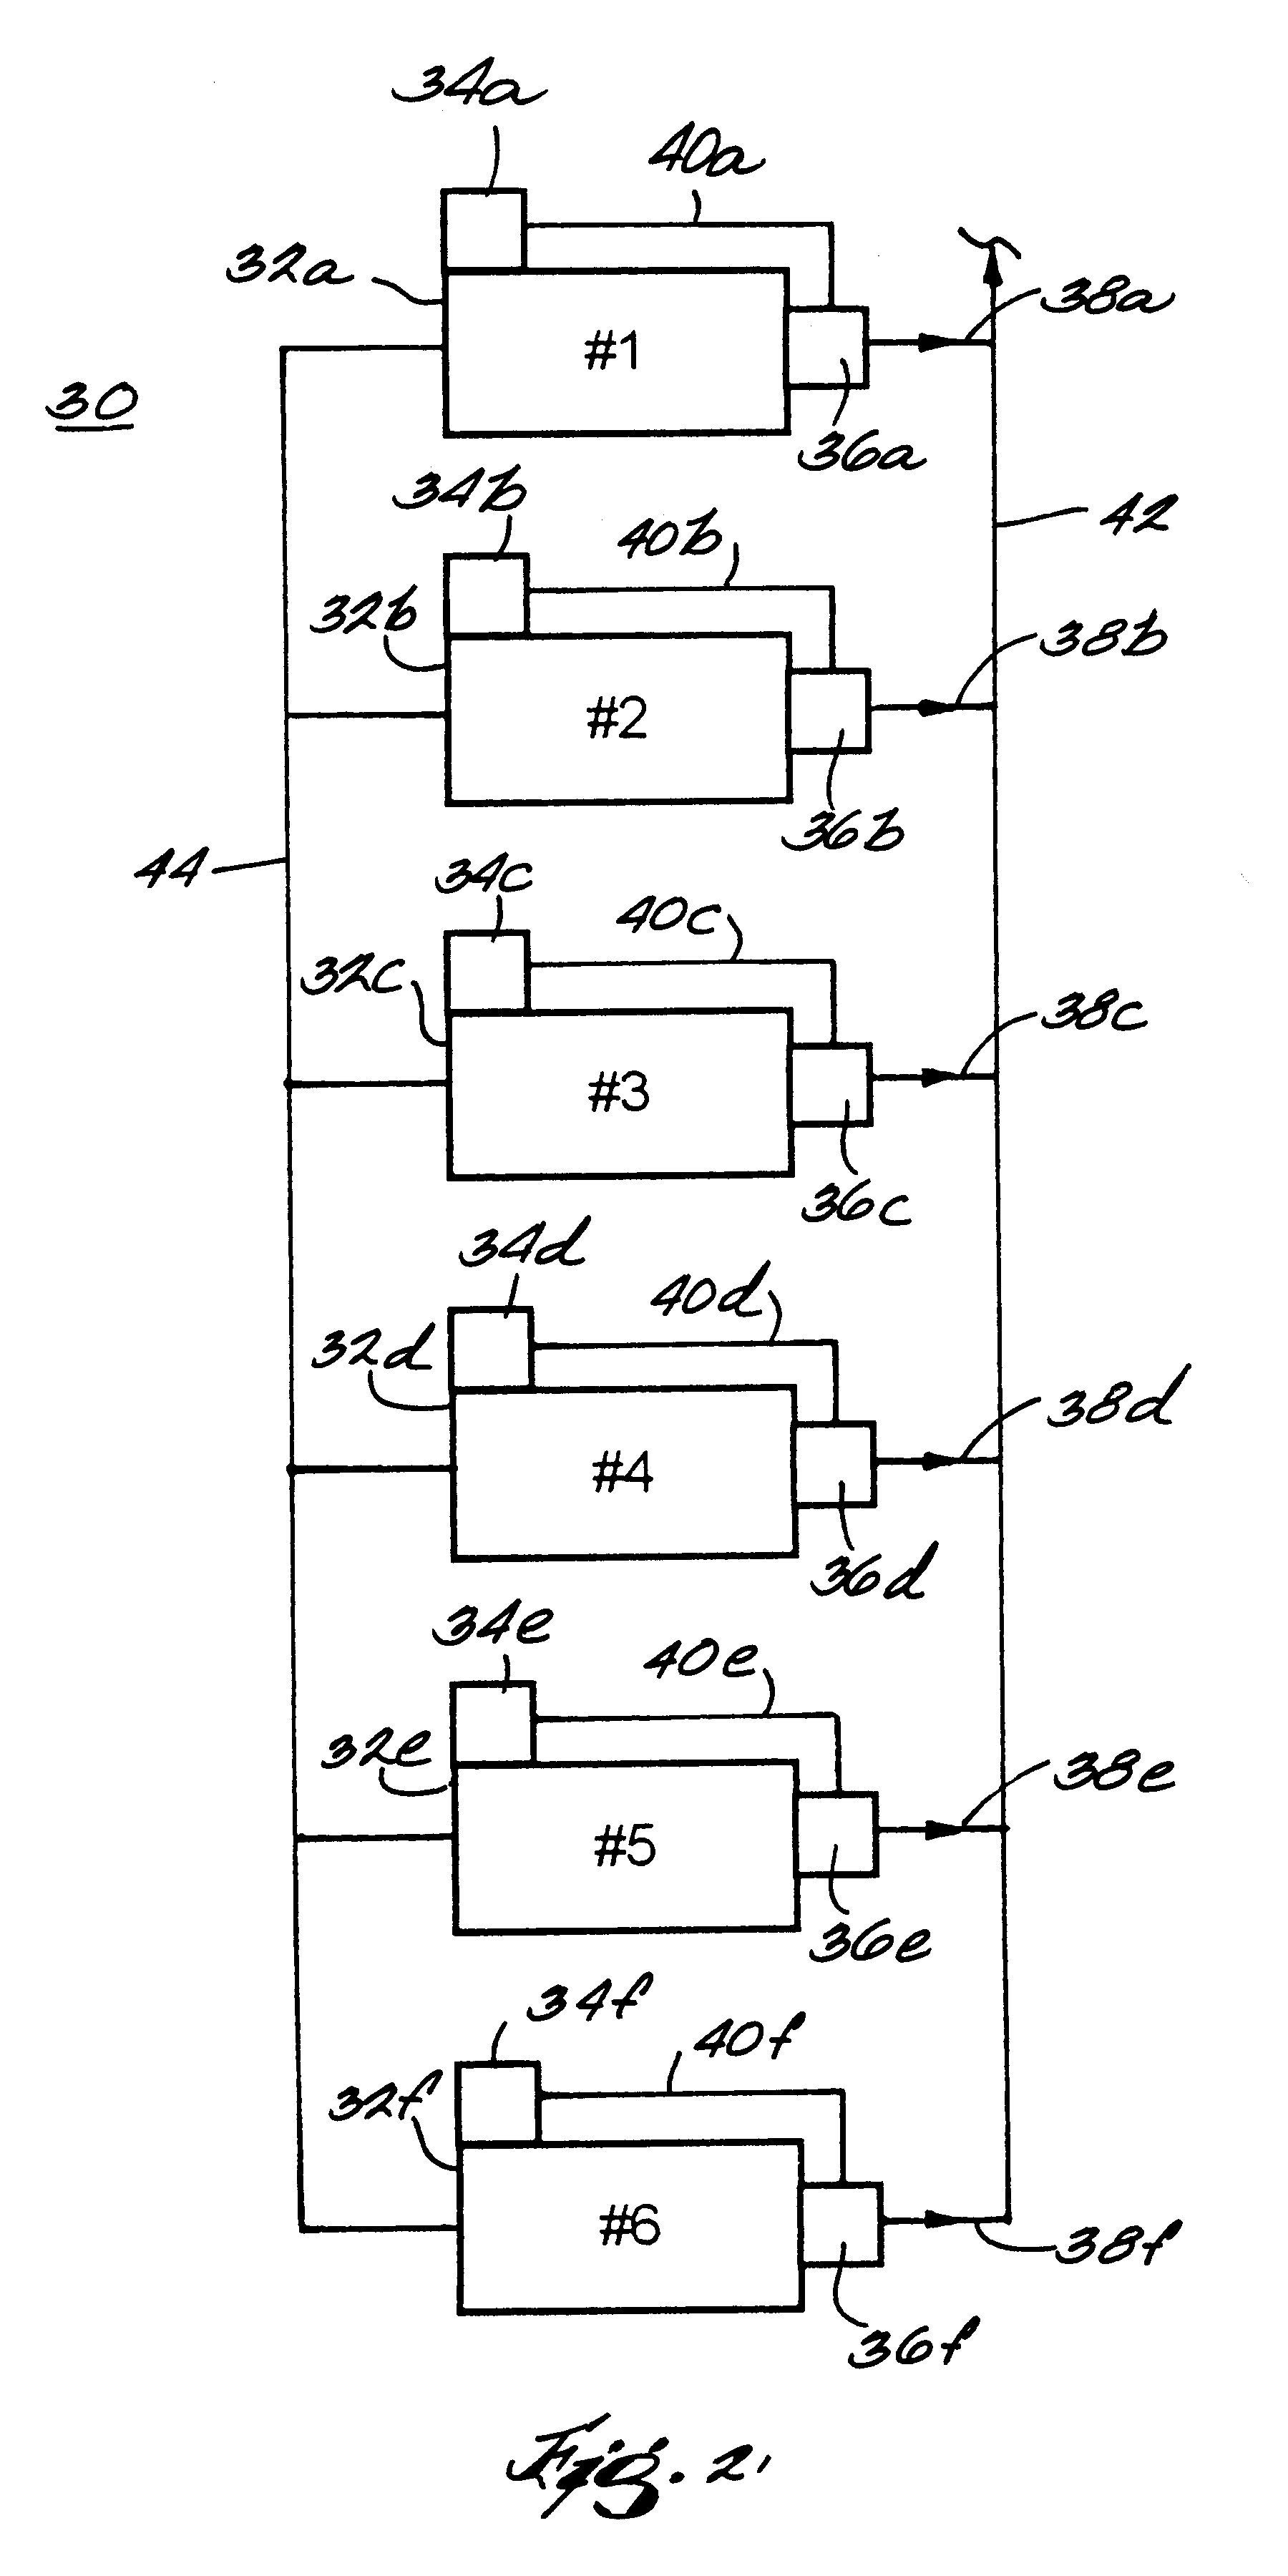 Method for controlling the operation of a compression system having a plurality of compressors